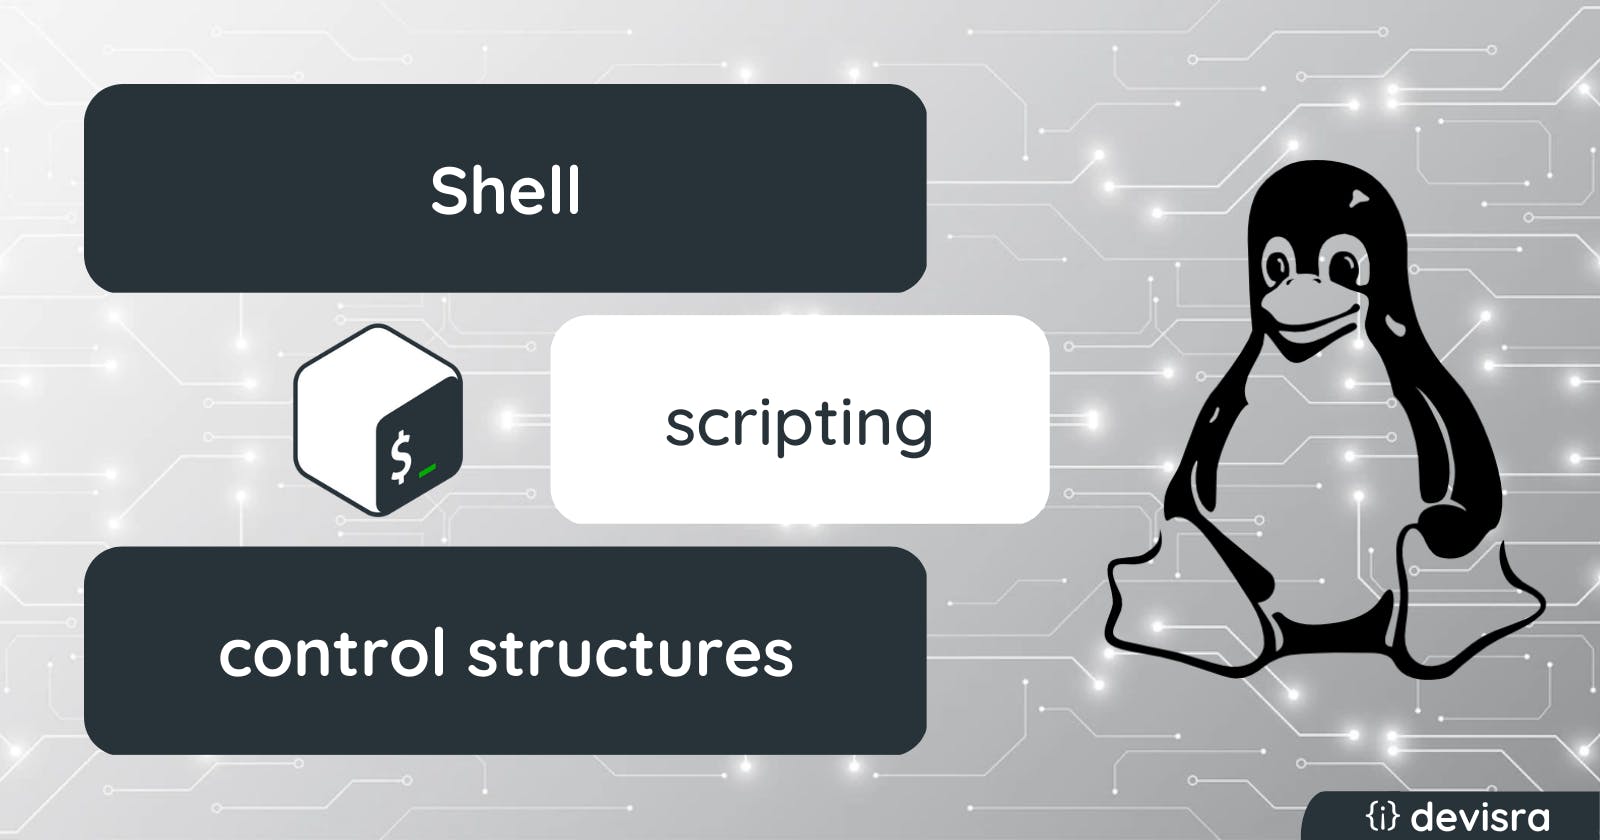 Control structures in shell scripting